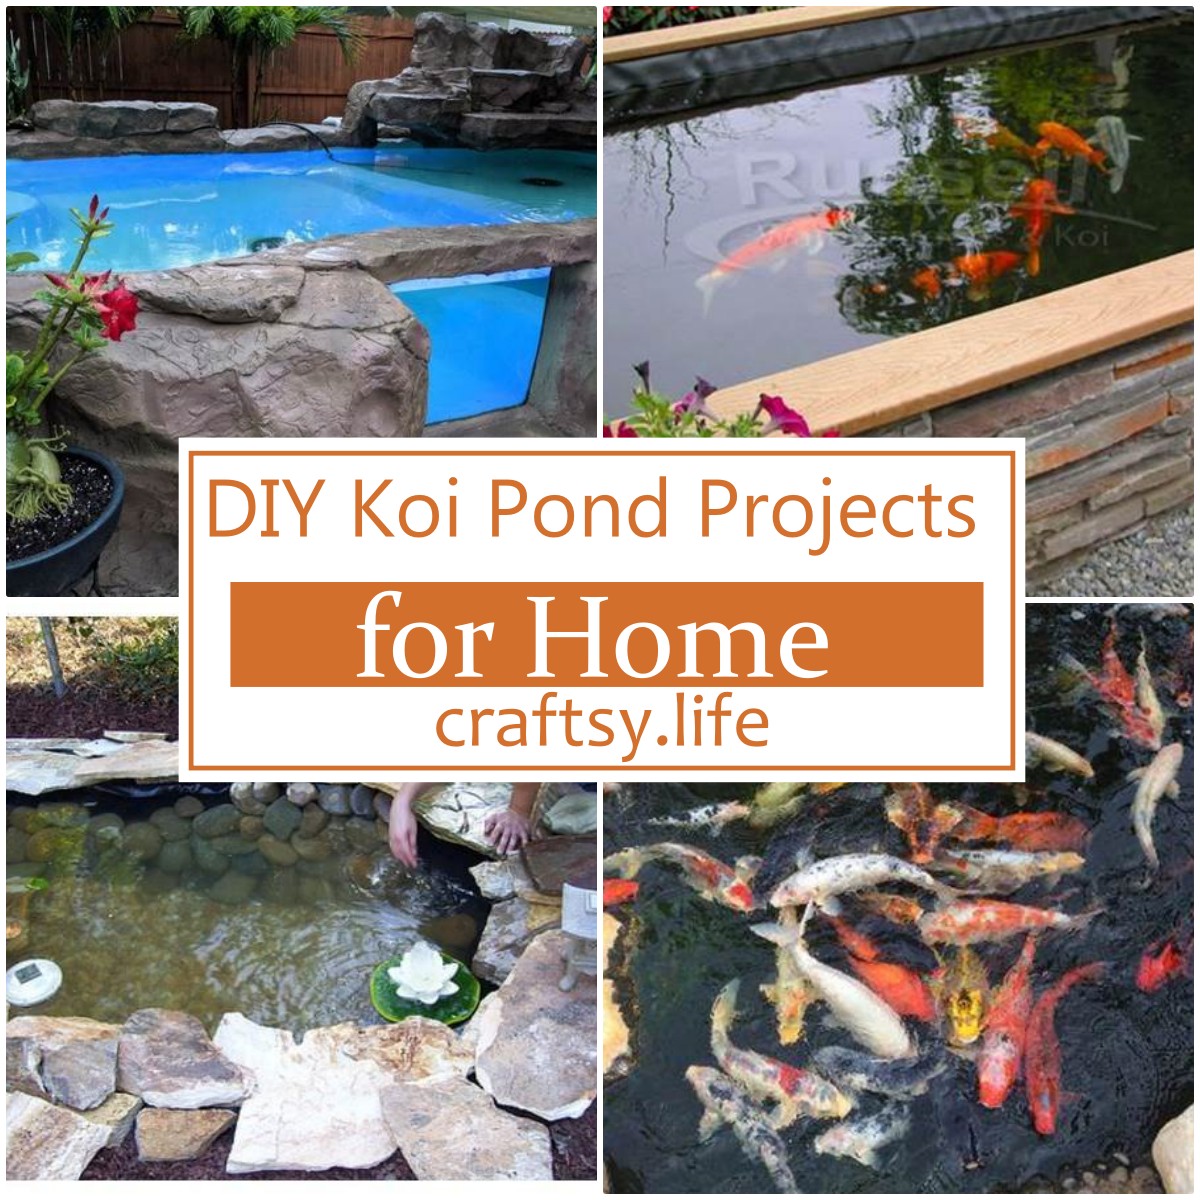 DIY Koi Pond Projects For Home